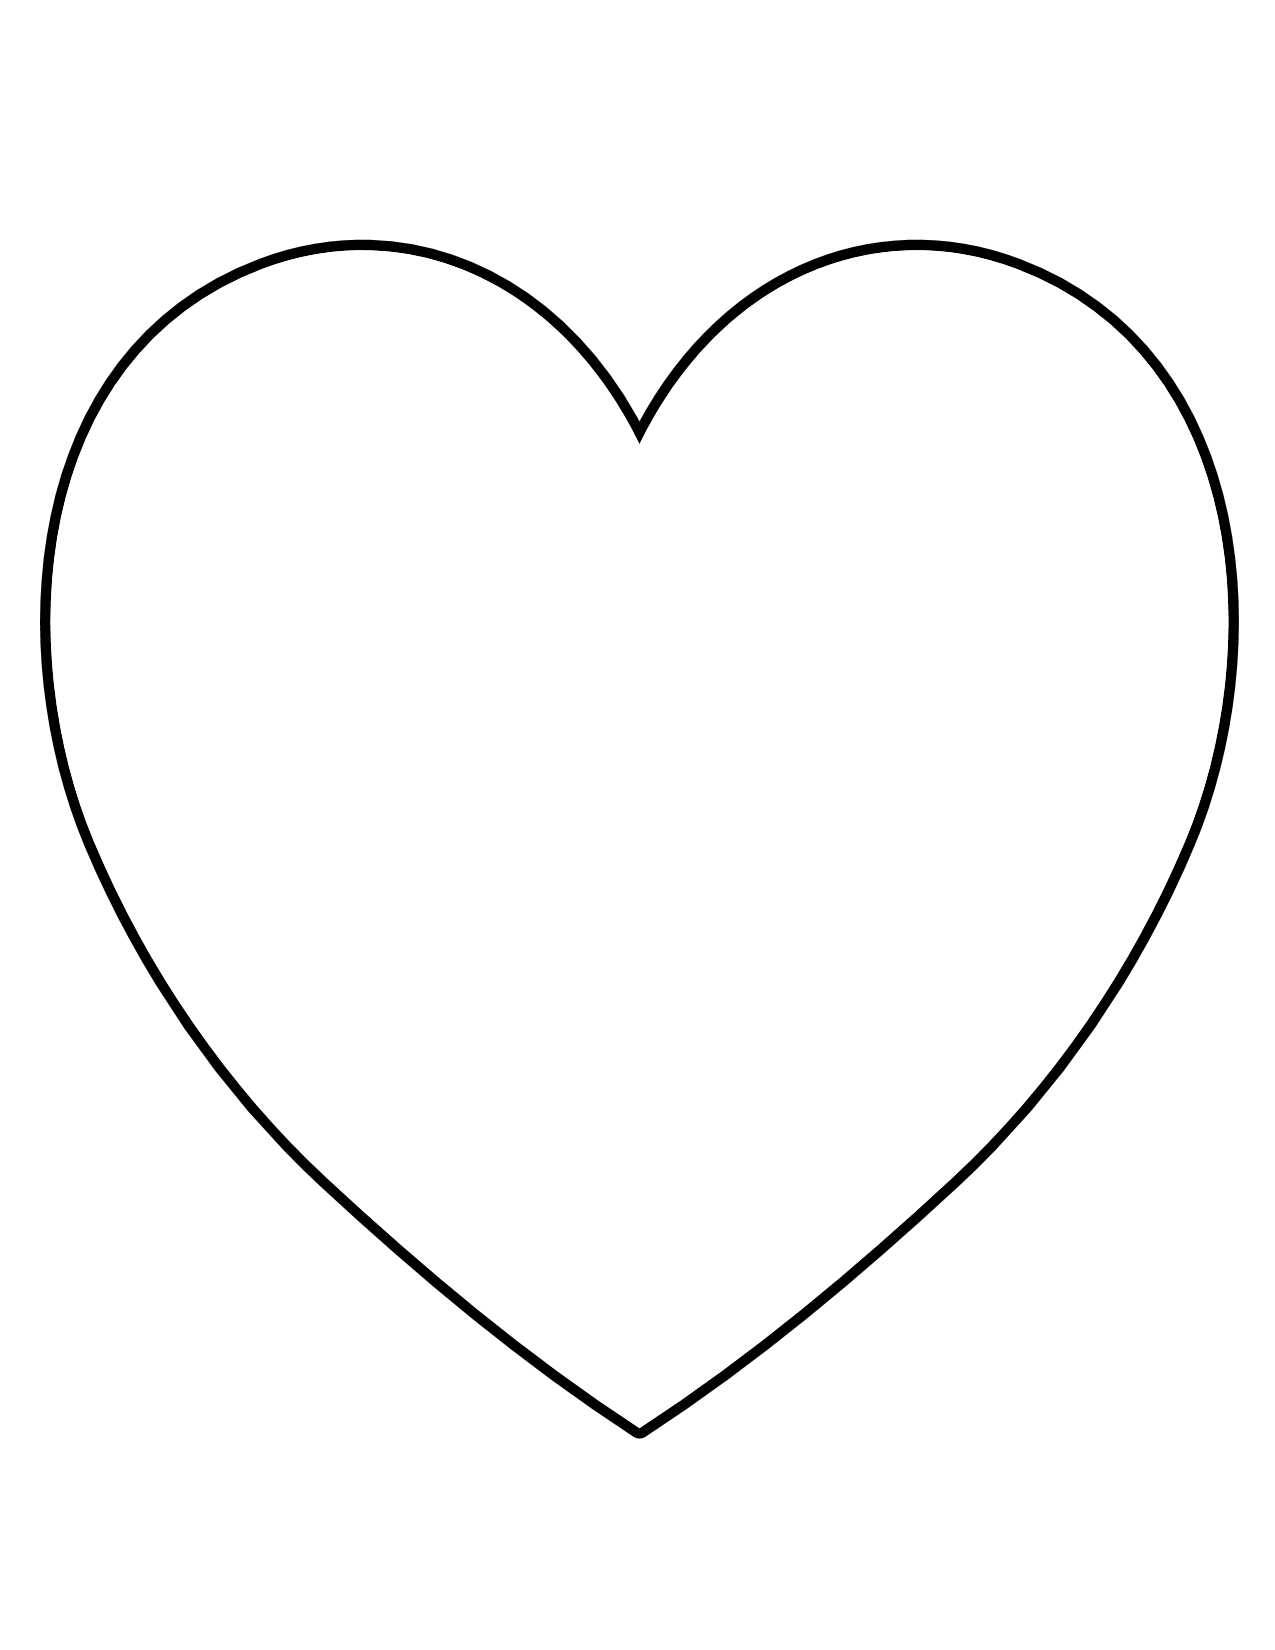 heart-shaped-template-free-clipart-best